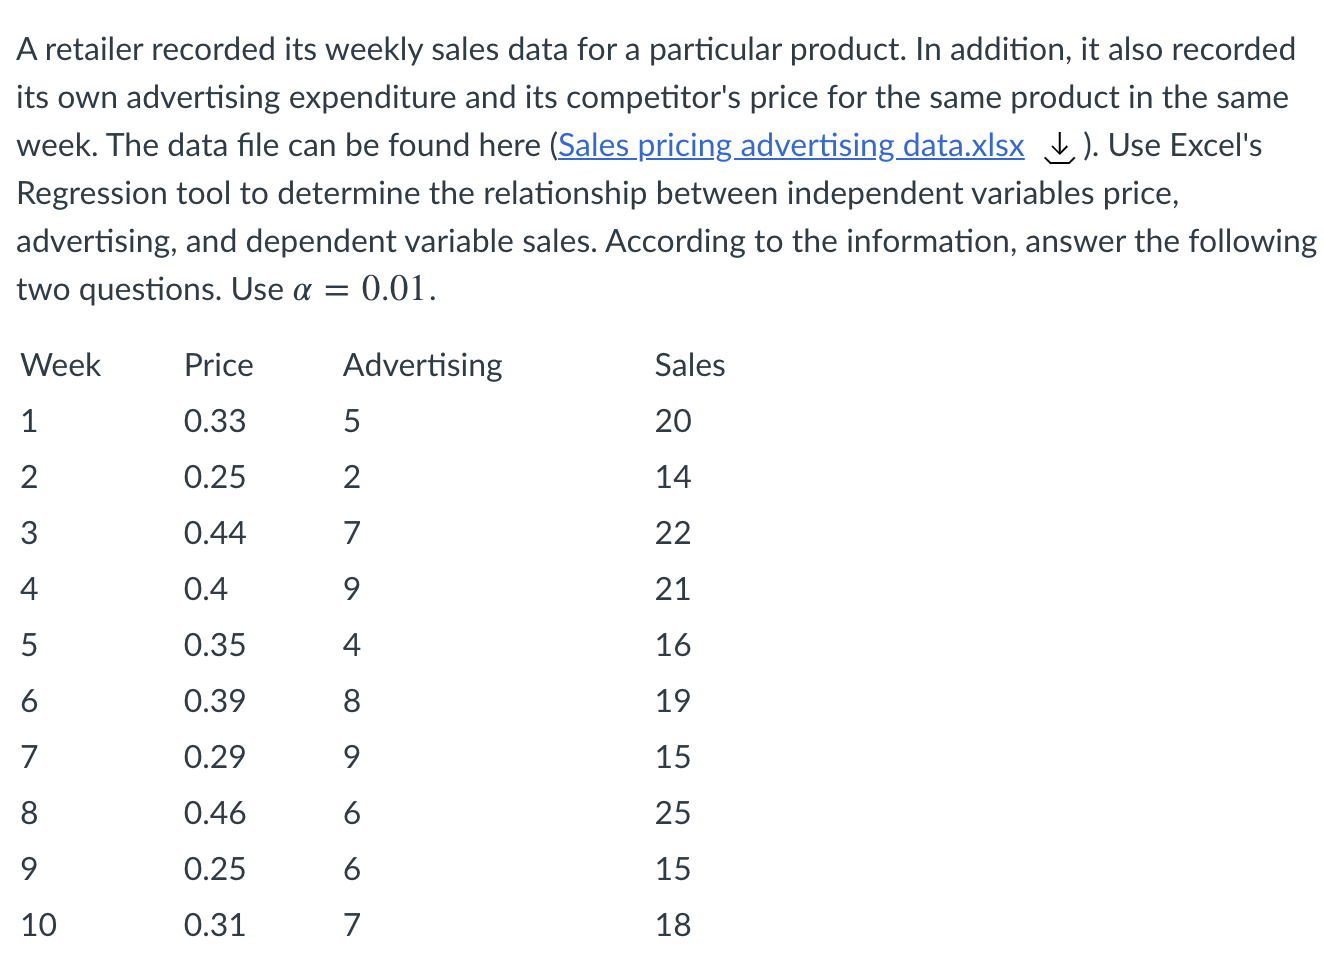 A Retailer Recorded Its Weekly Sales Data For A Particular Product In Addition It Also Recorded Its Own Advertising Ex 1